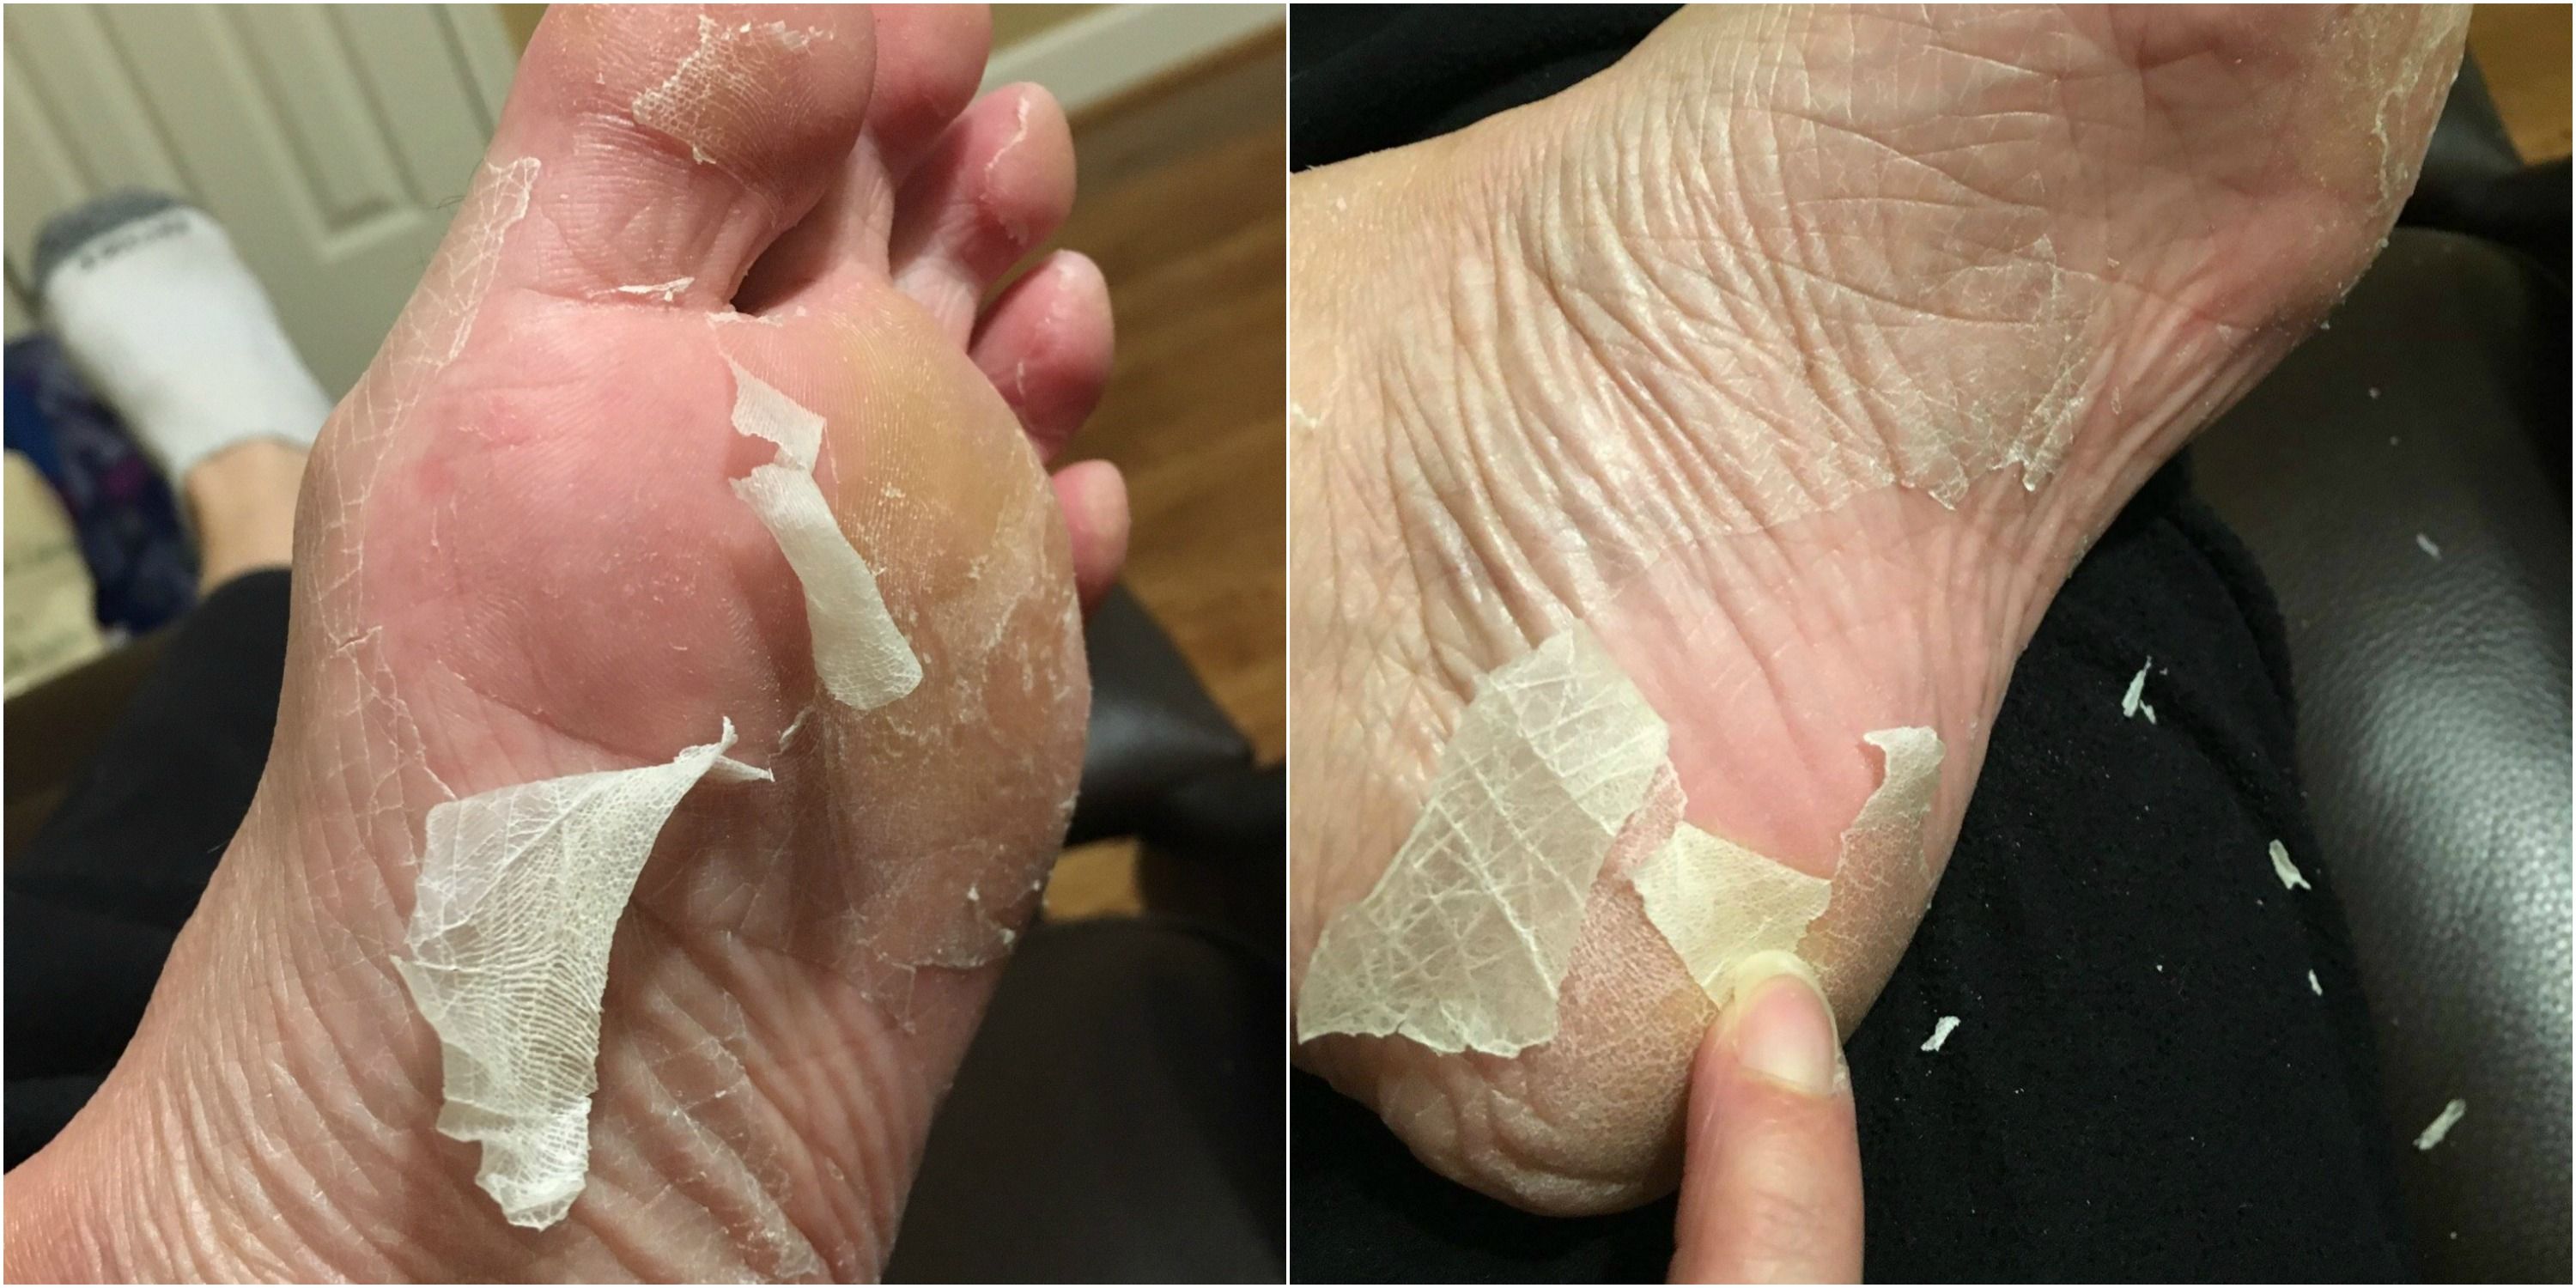 Baby Foot Peel Review for 2020 - Does Baby Foot Work for Calluses